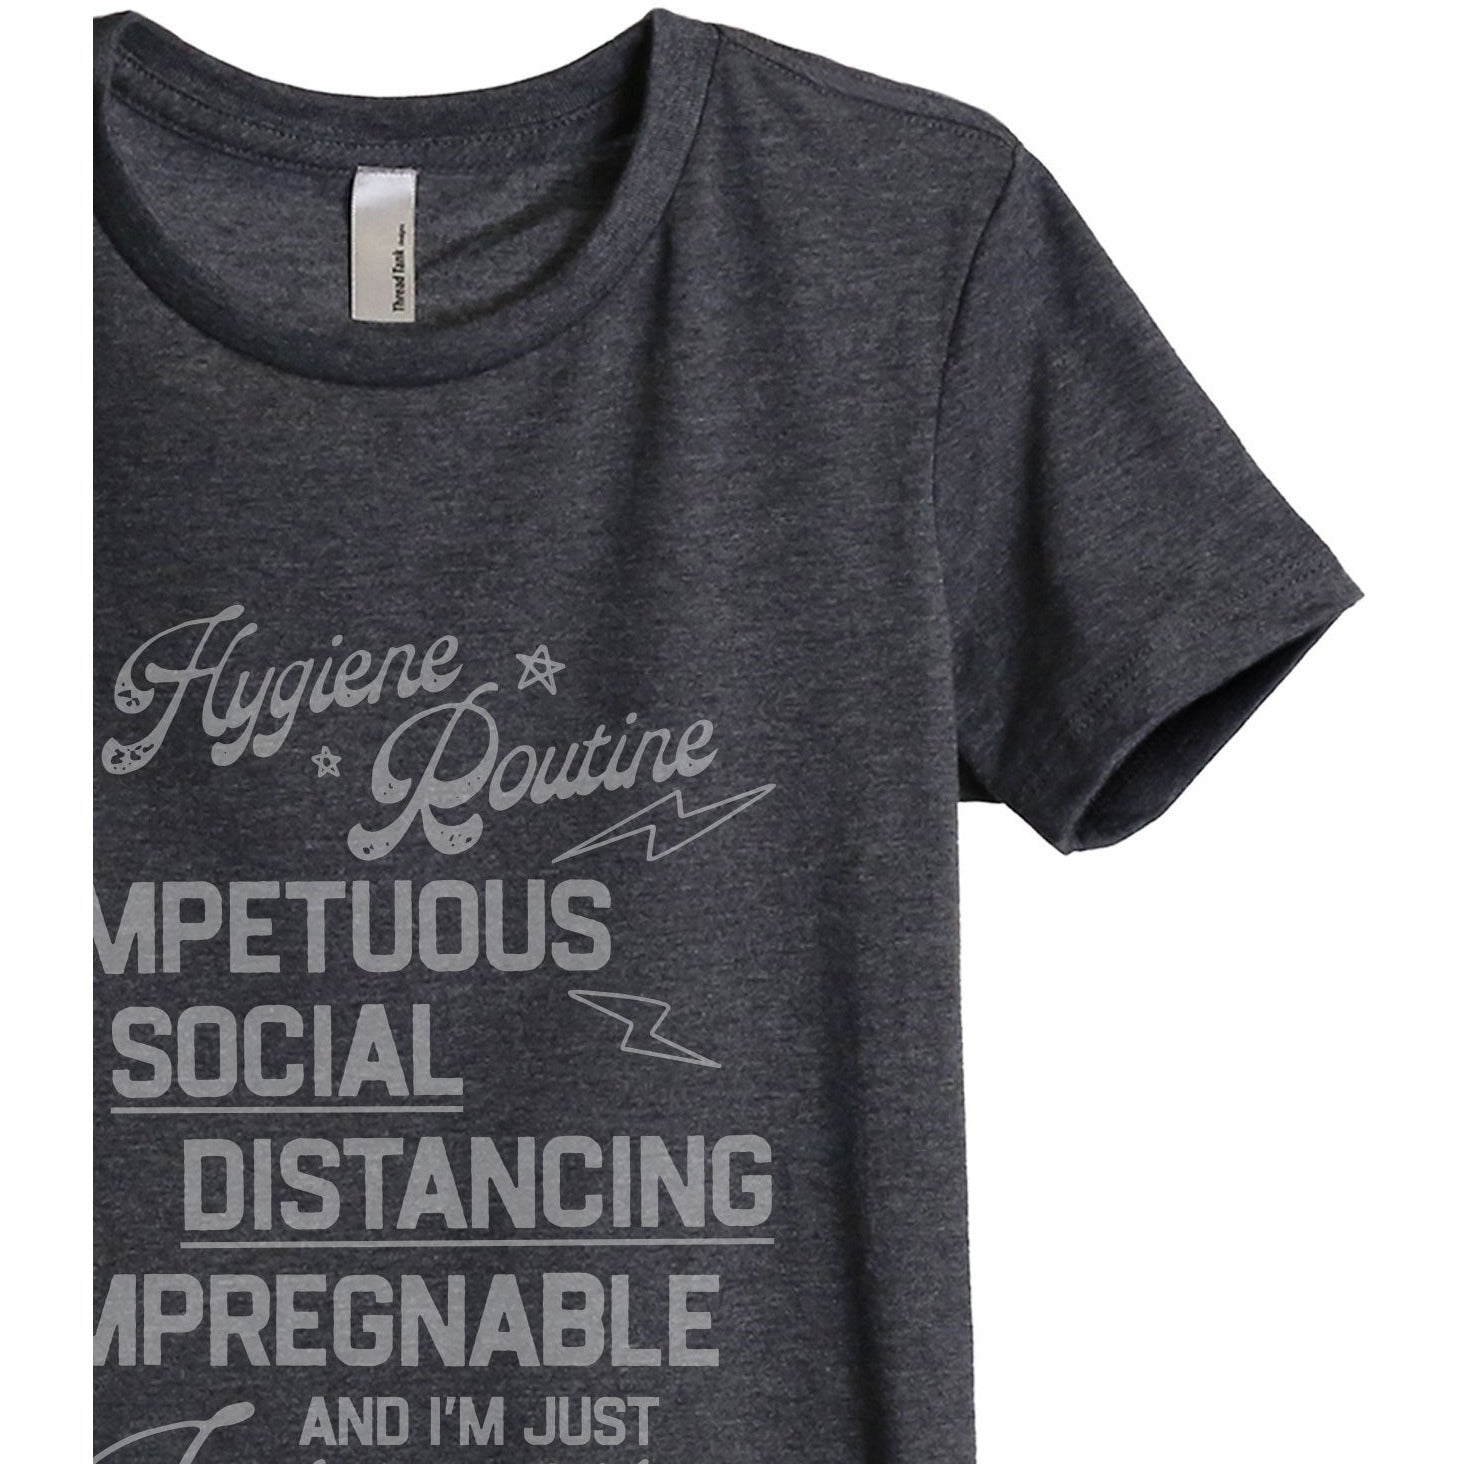 Hygiene Routine Impetuous Women's Relaxed Crewneck T-Shirt Top Tee Charcoal Grey Zoom Details